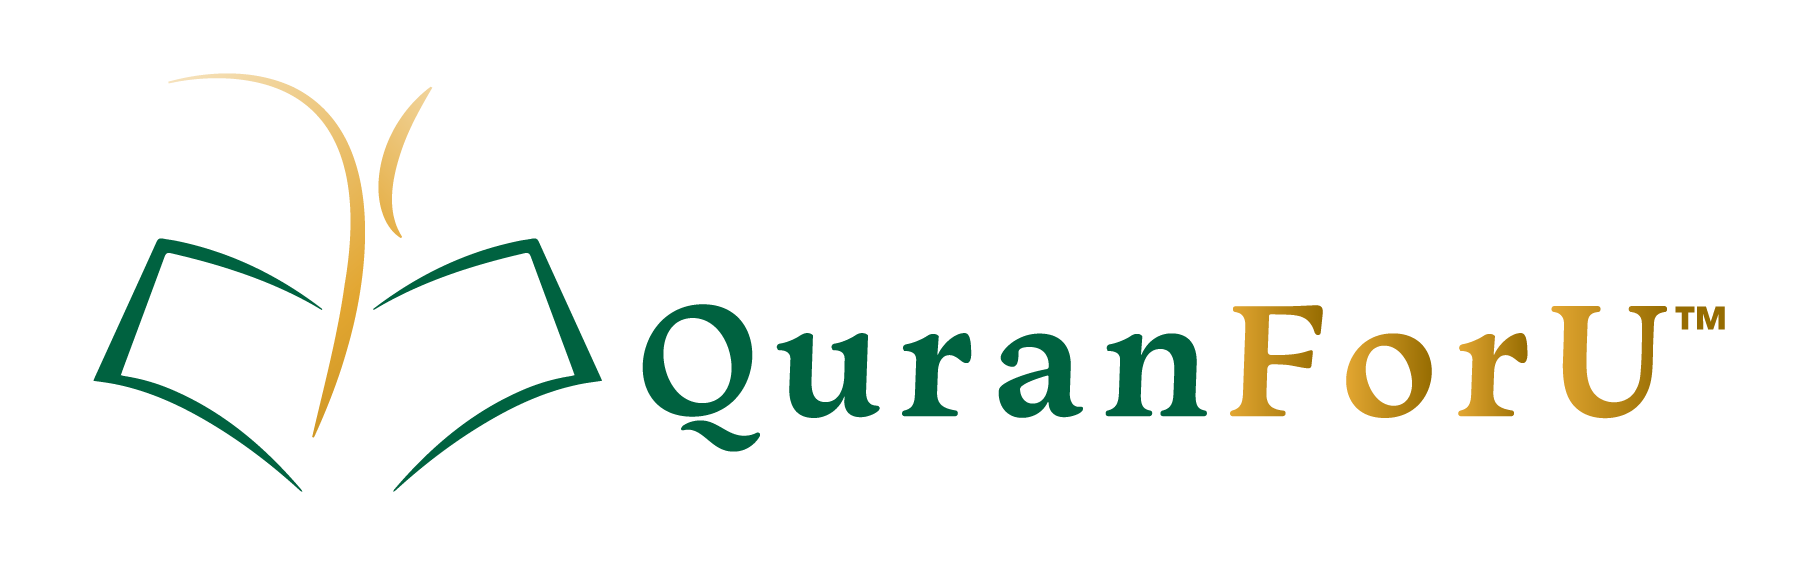 Quran For U – Online Tutor Marketplace for the Quran and much more!